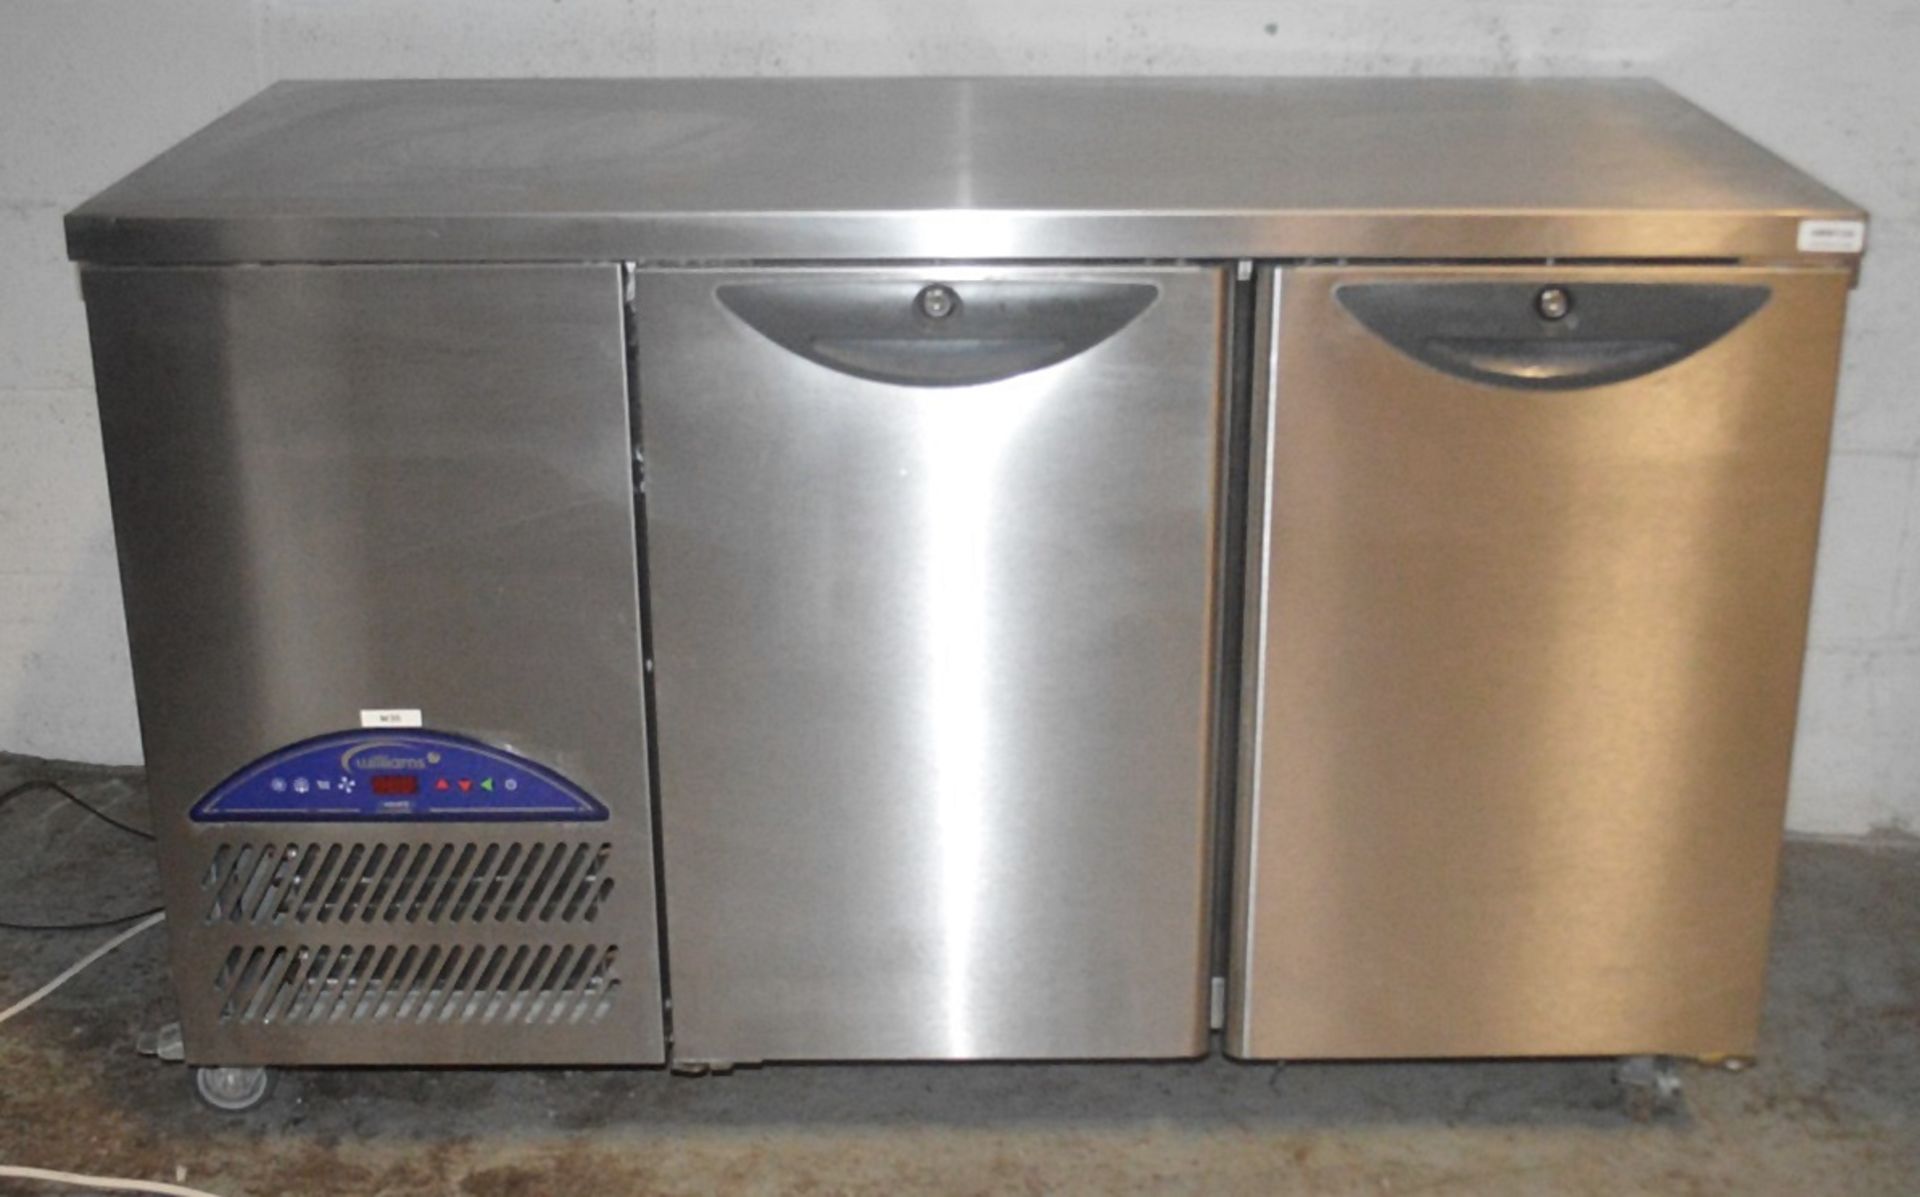 1 x Two Door Williams Counter Top Fridge - More Information to Follow - CL595 - Location: Altrincham